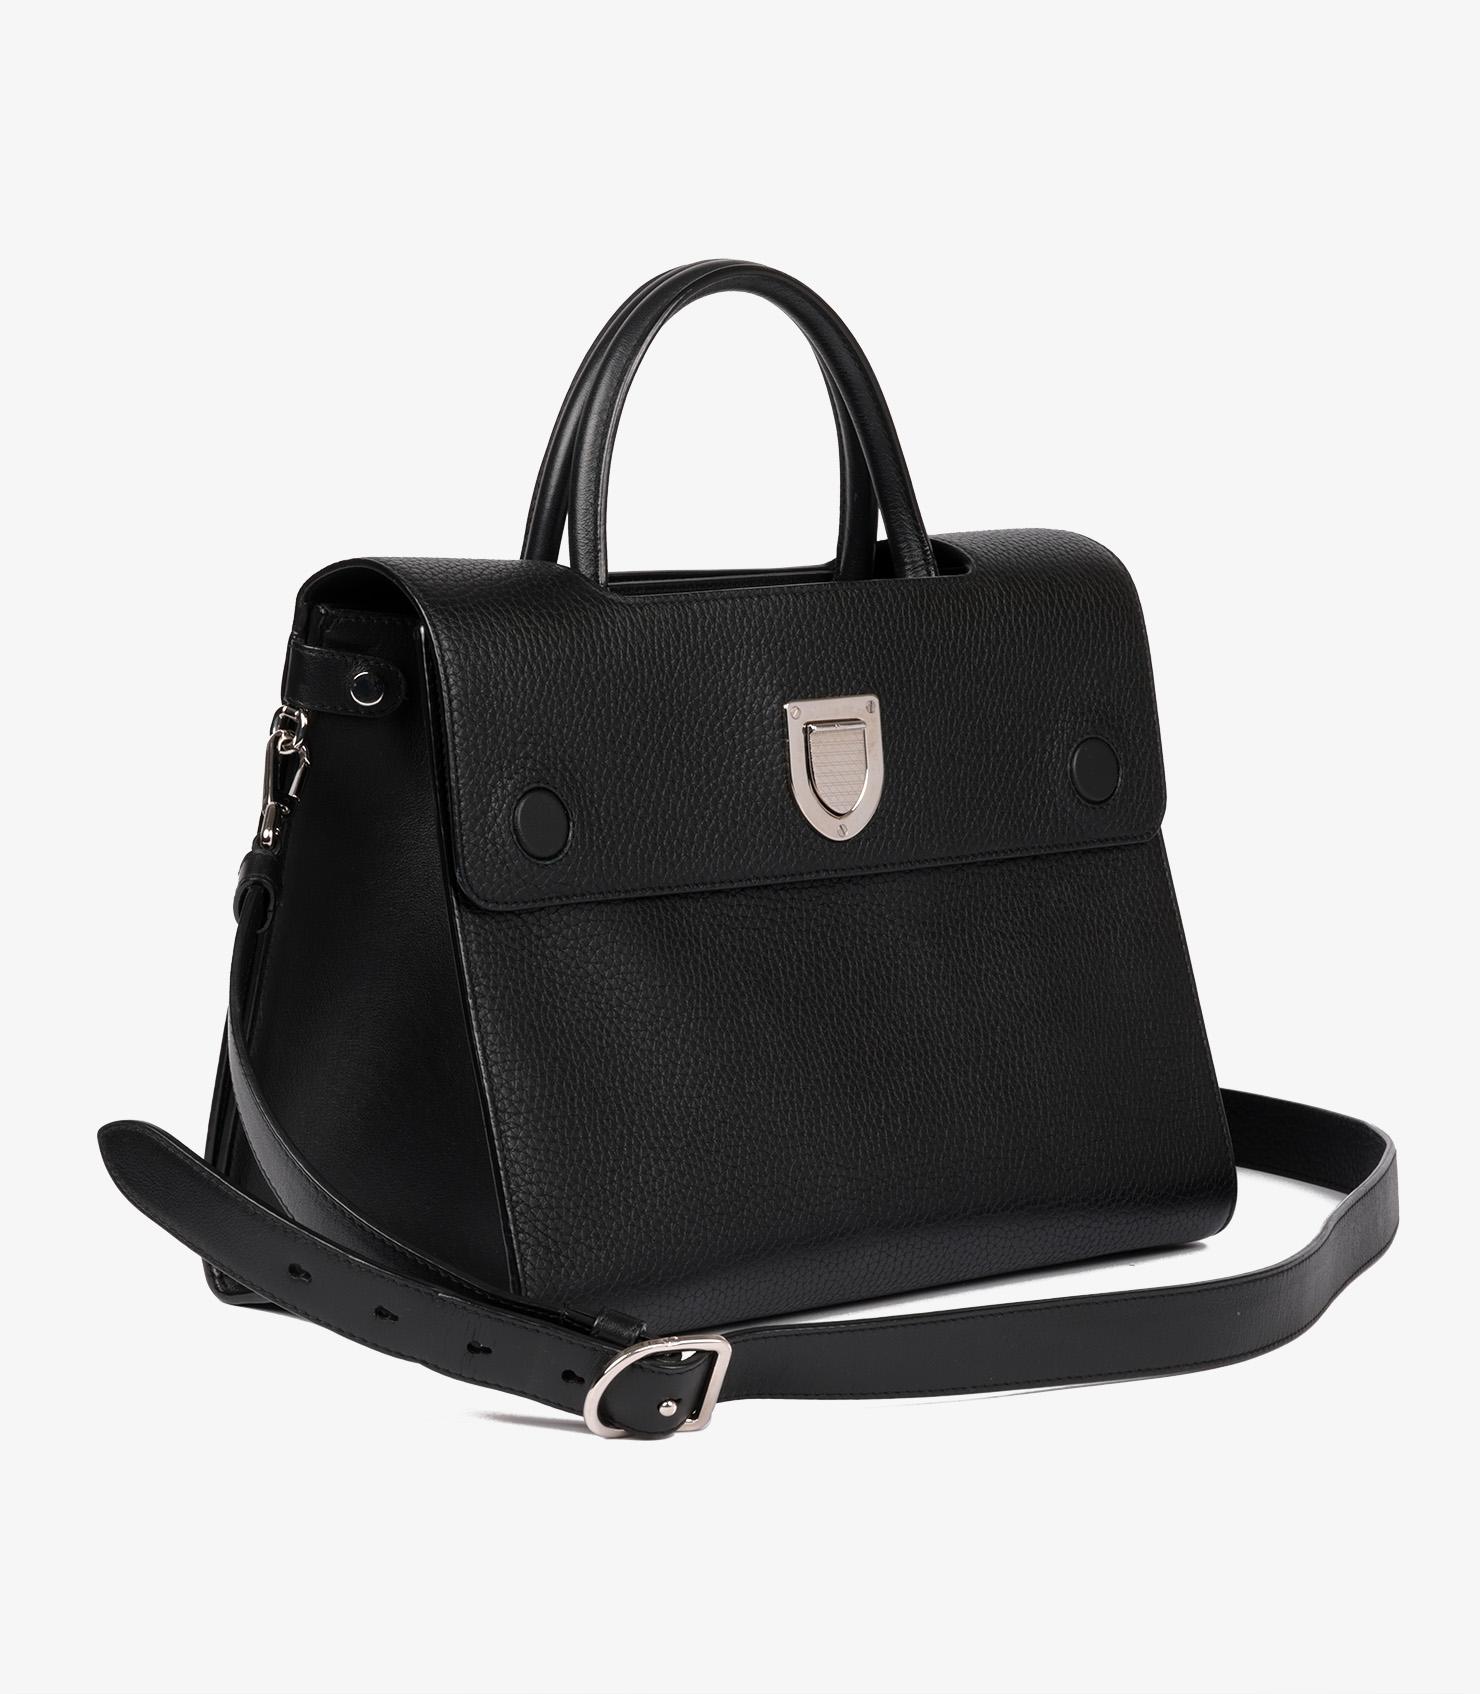 Dior Black Grained Calfskin Leather Diorever Flap Tote In Excellent Condition For Sale In Bishop's Stortford, Hertfordshire